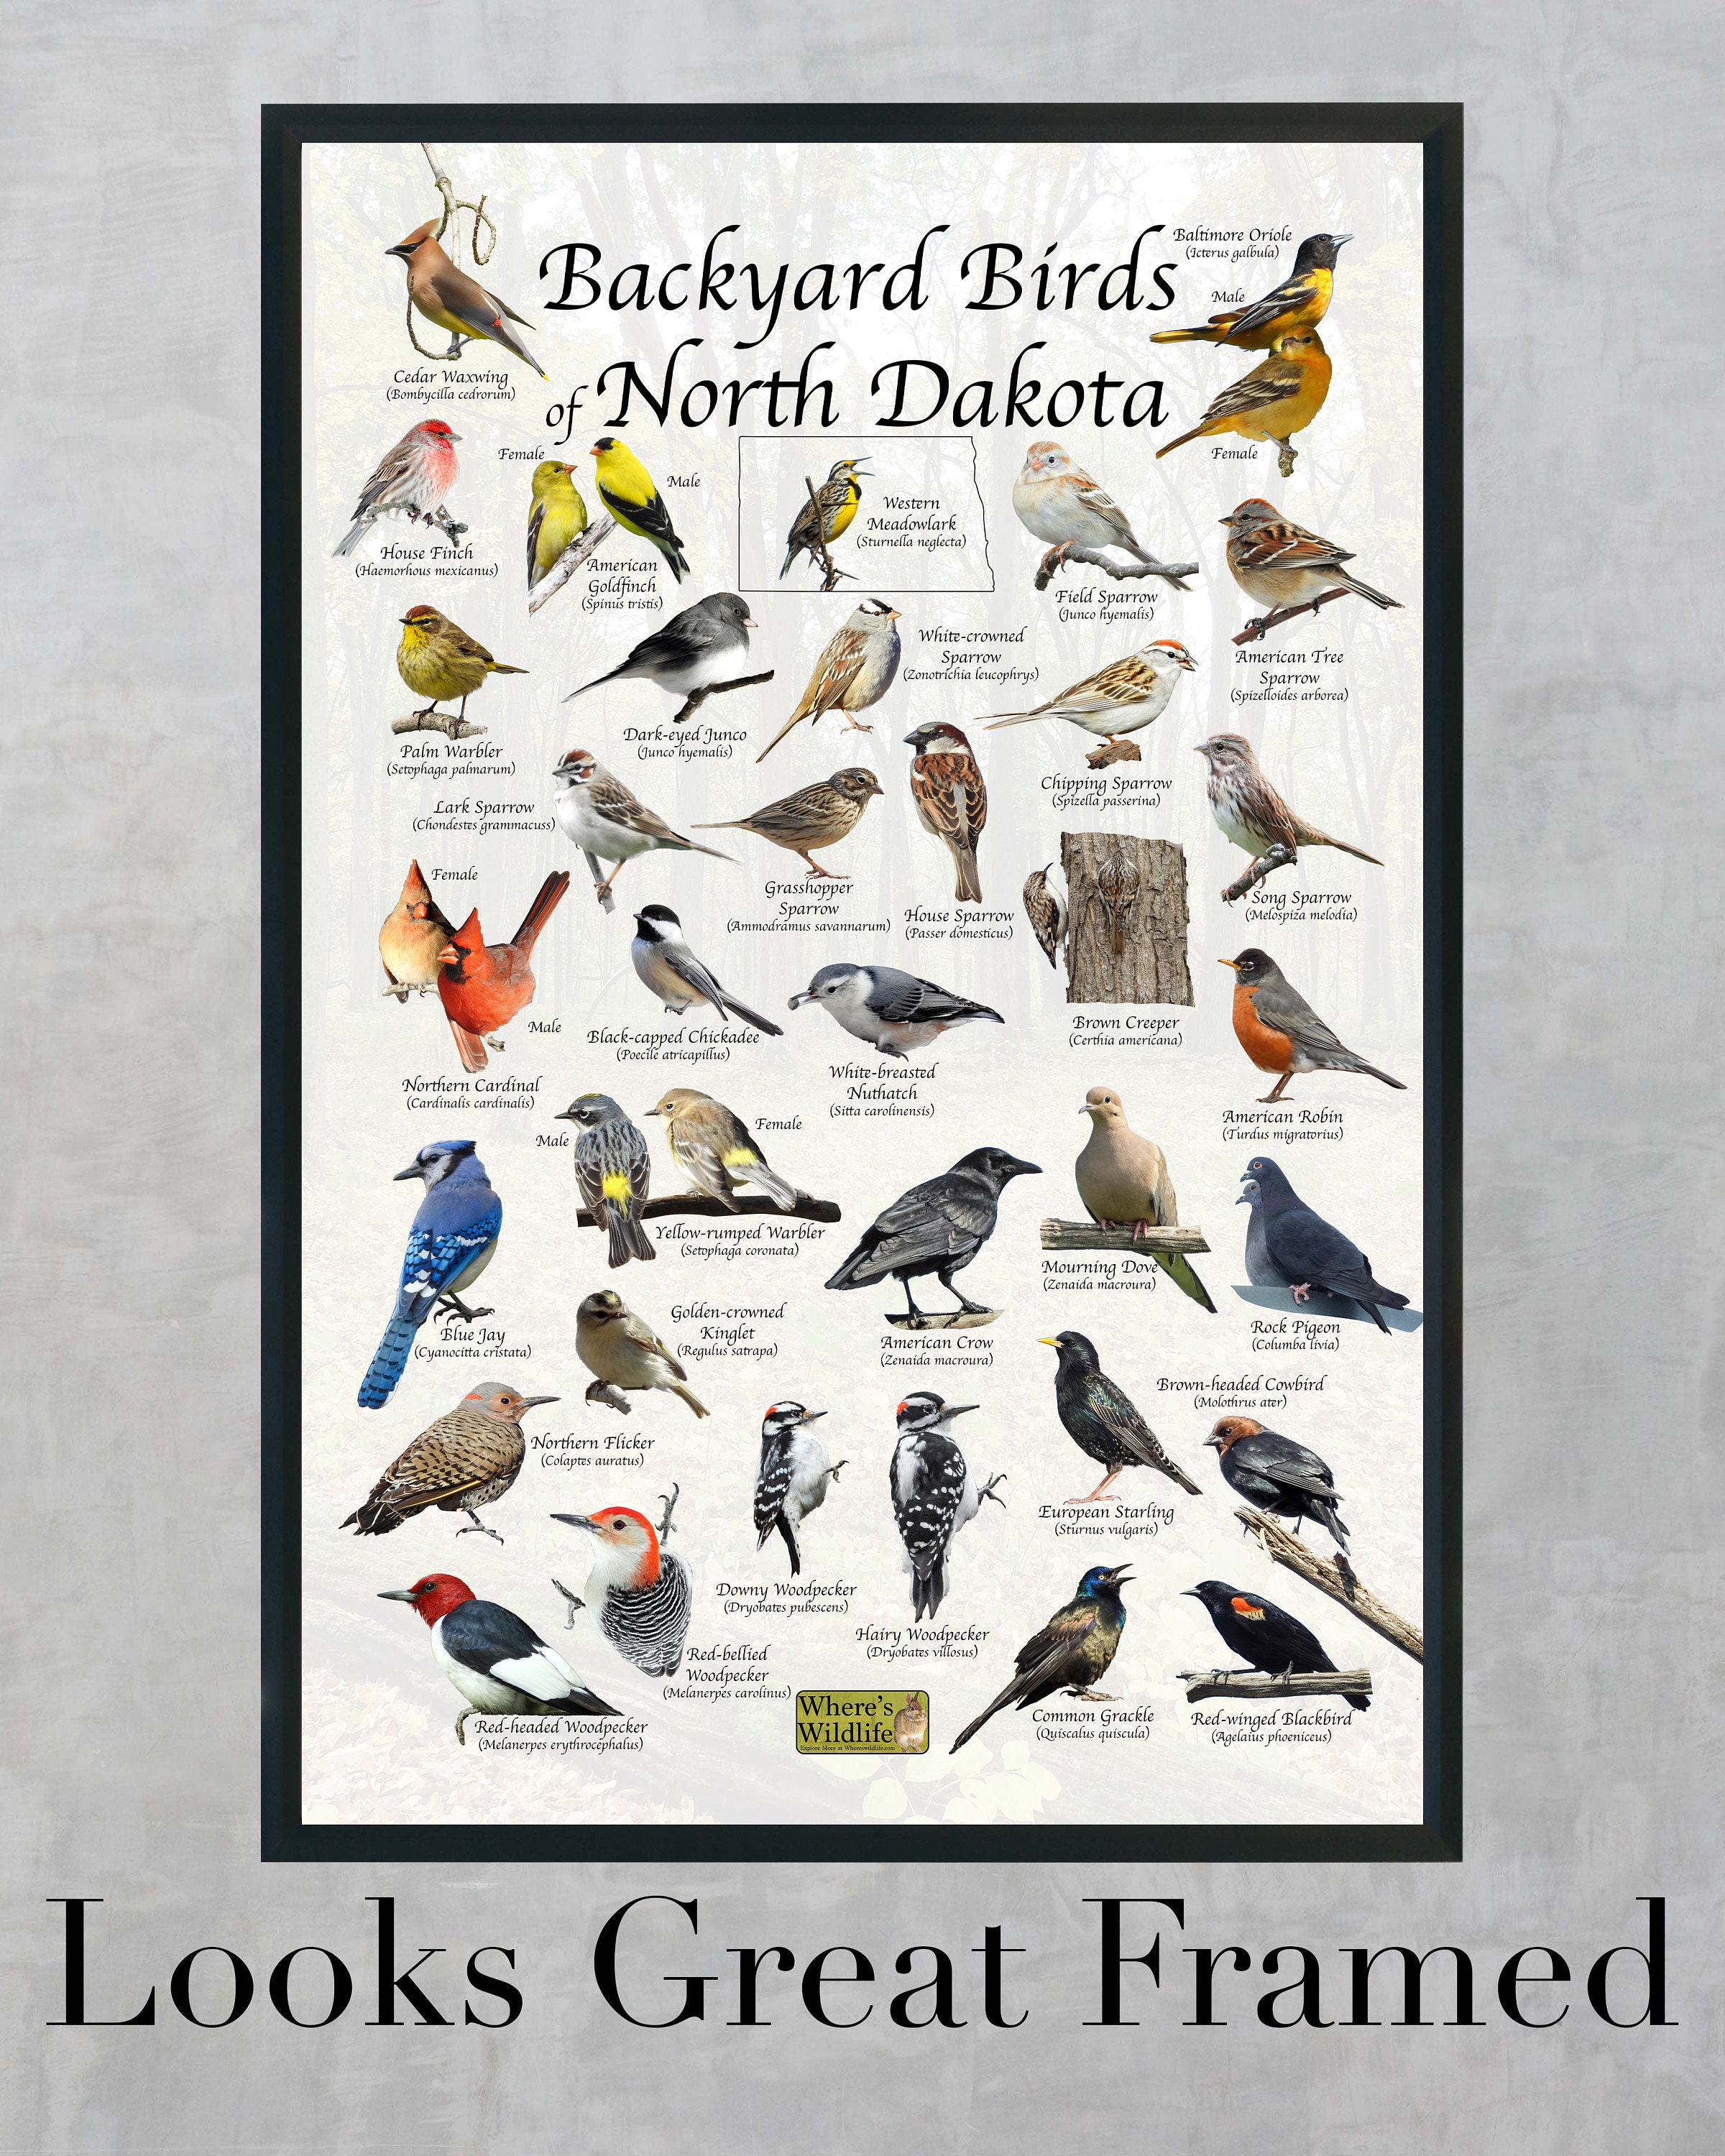 Common Birds of North Central Washington poster - North Central